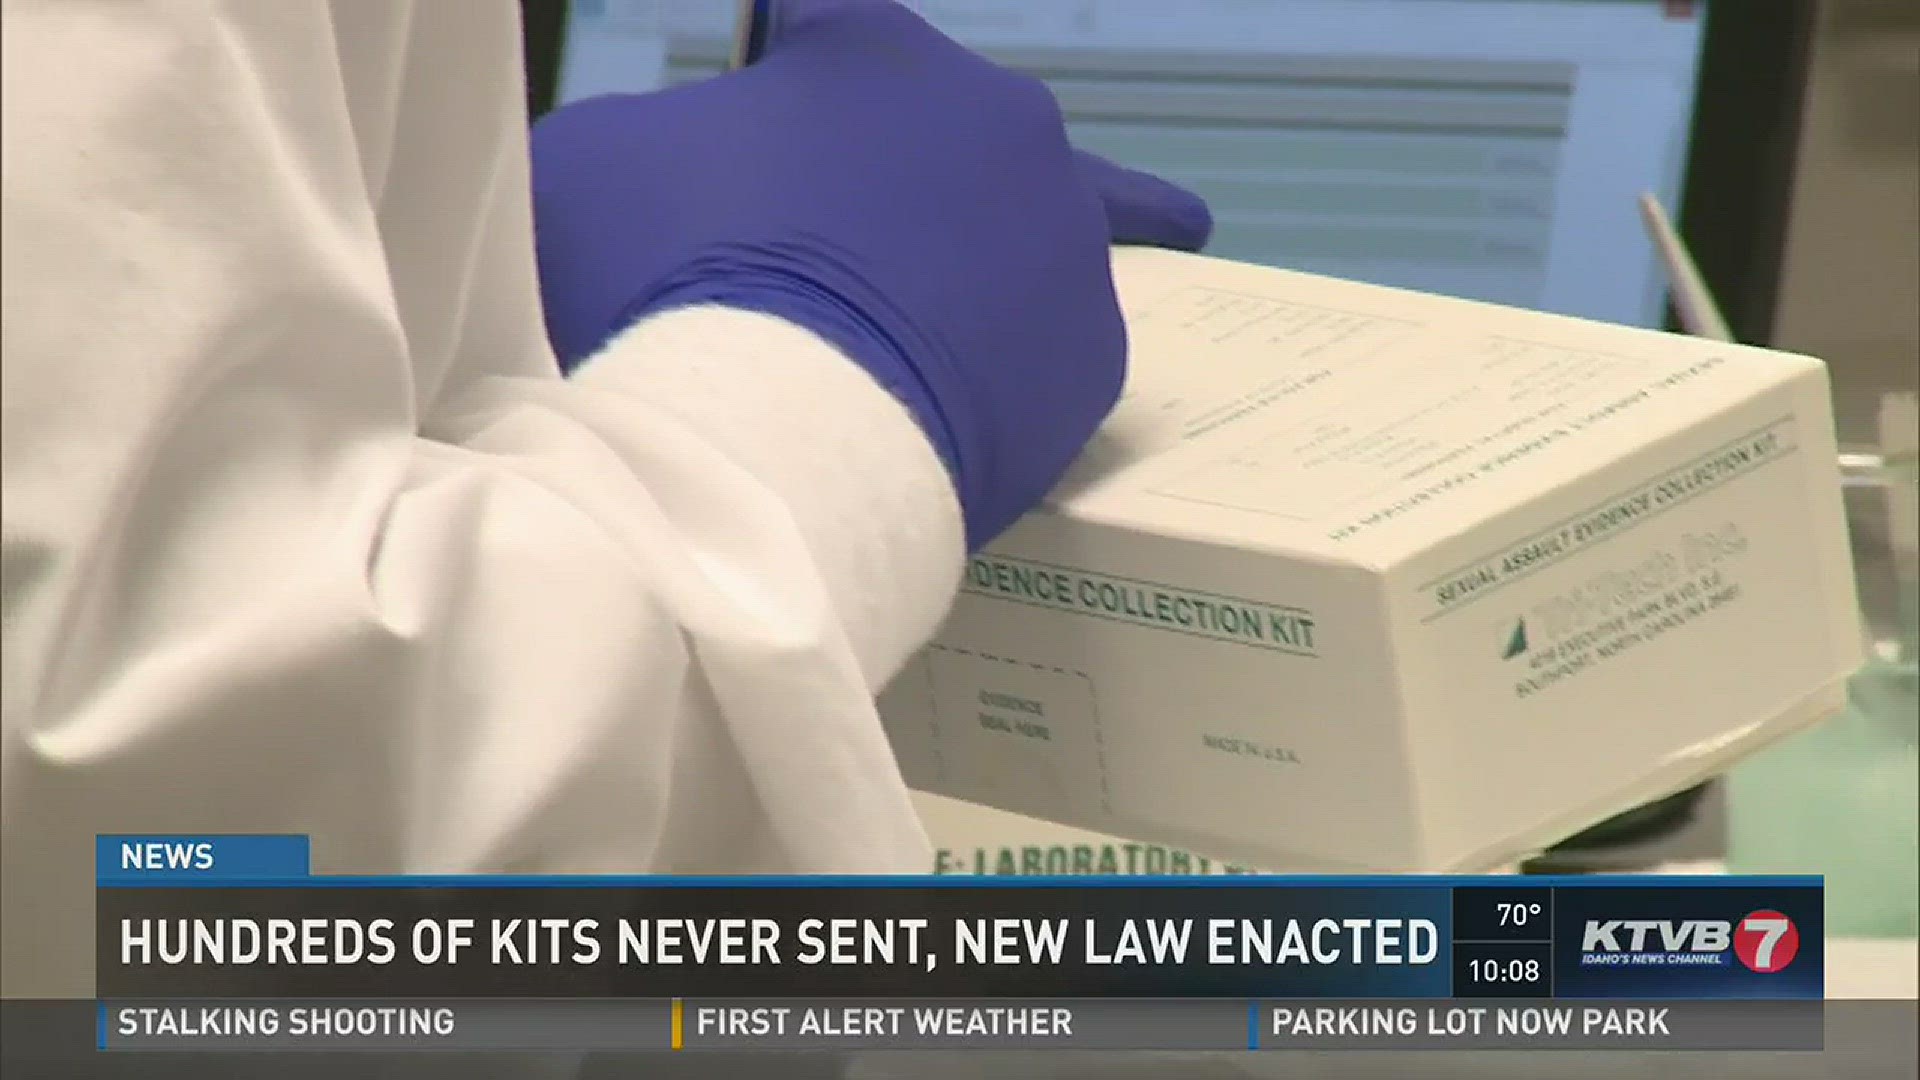 Hundreds of kits never sent, new law enacted